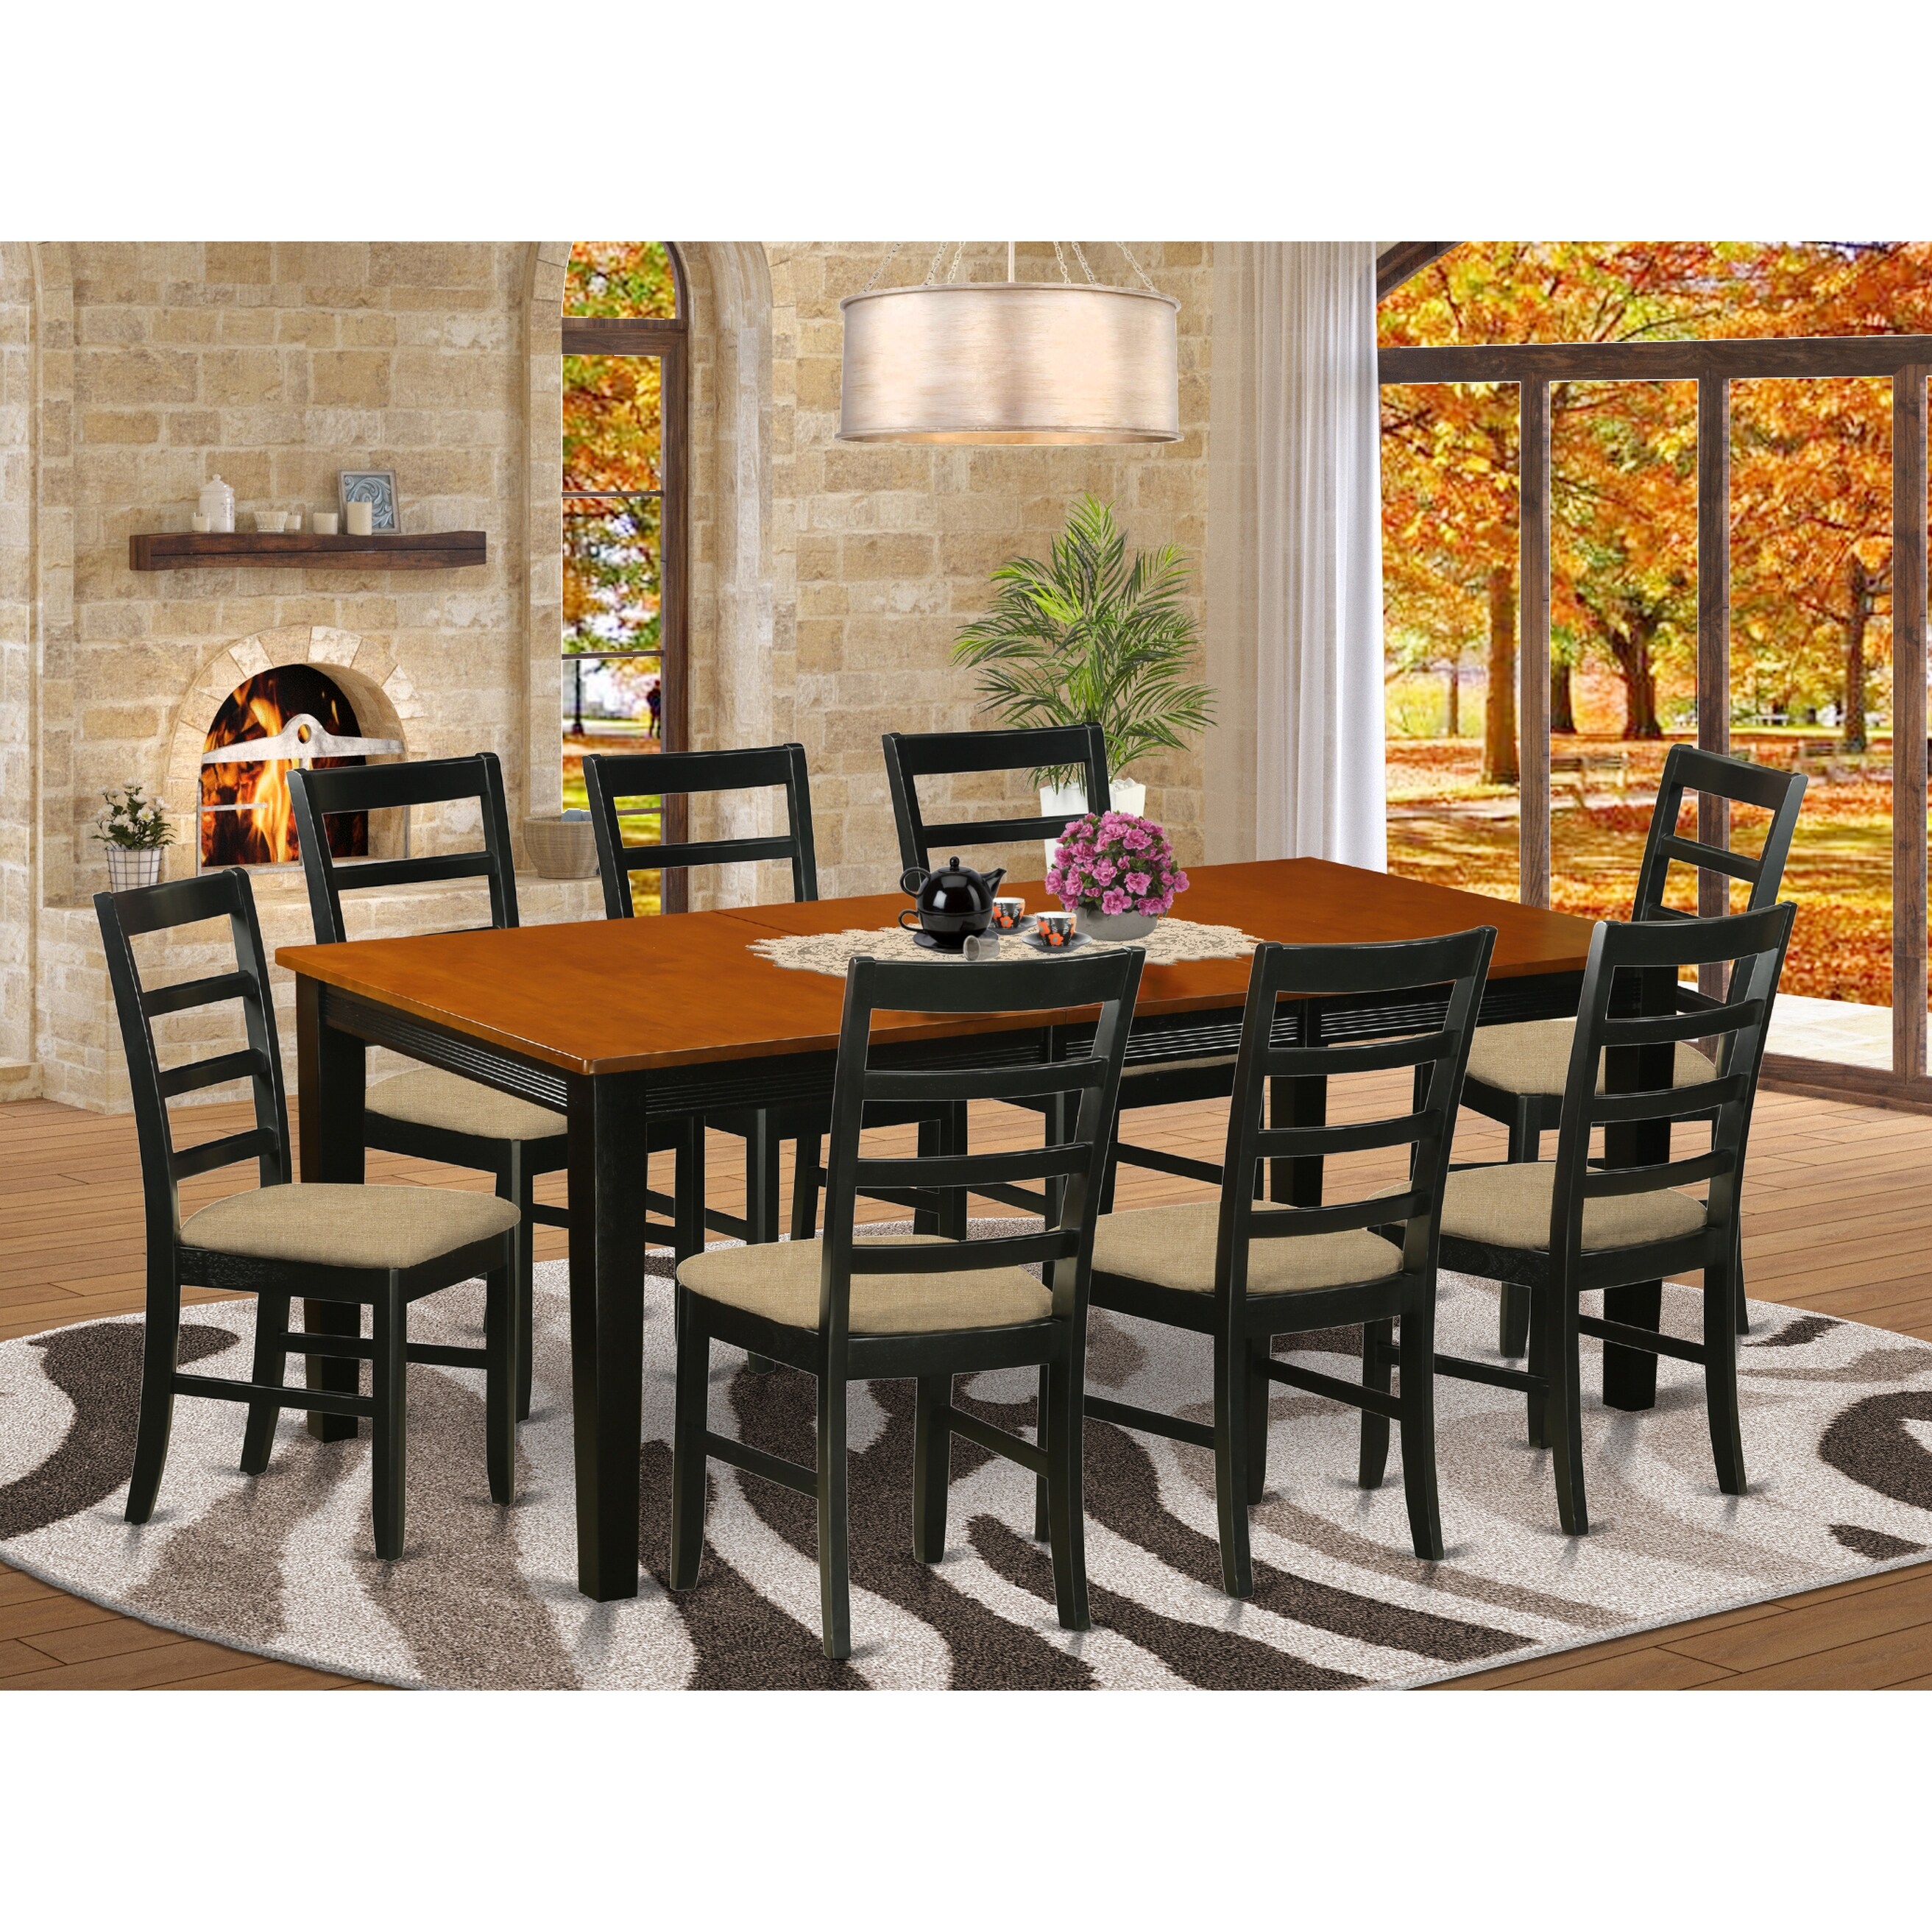 Dining Room Chairs Modern Wood Seat Shaker Furniture Seating Office Desk 4 Pack 